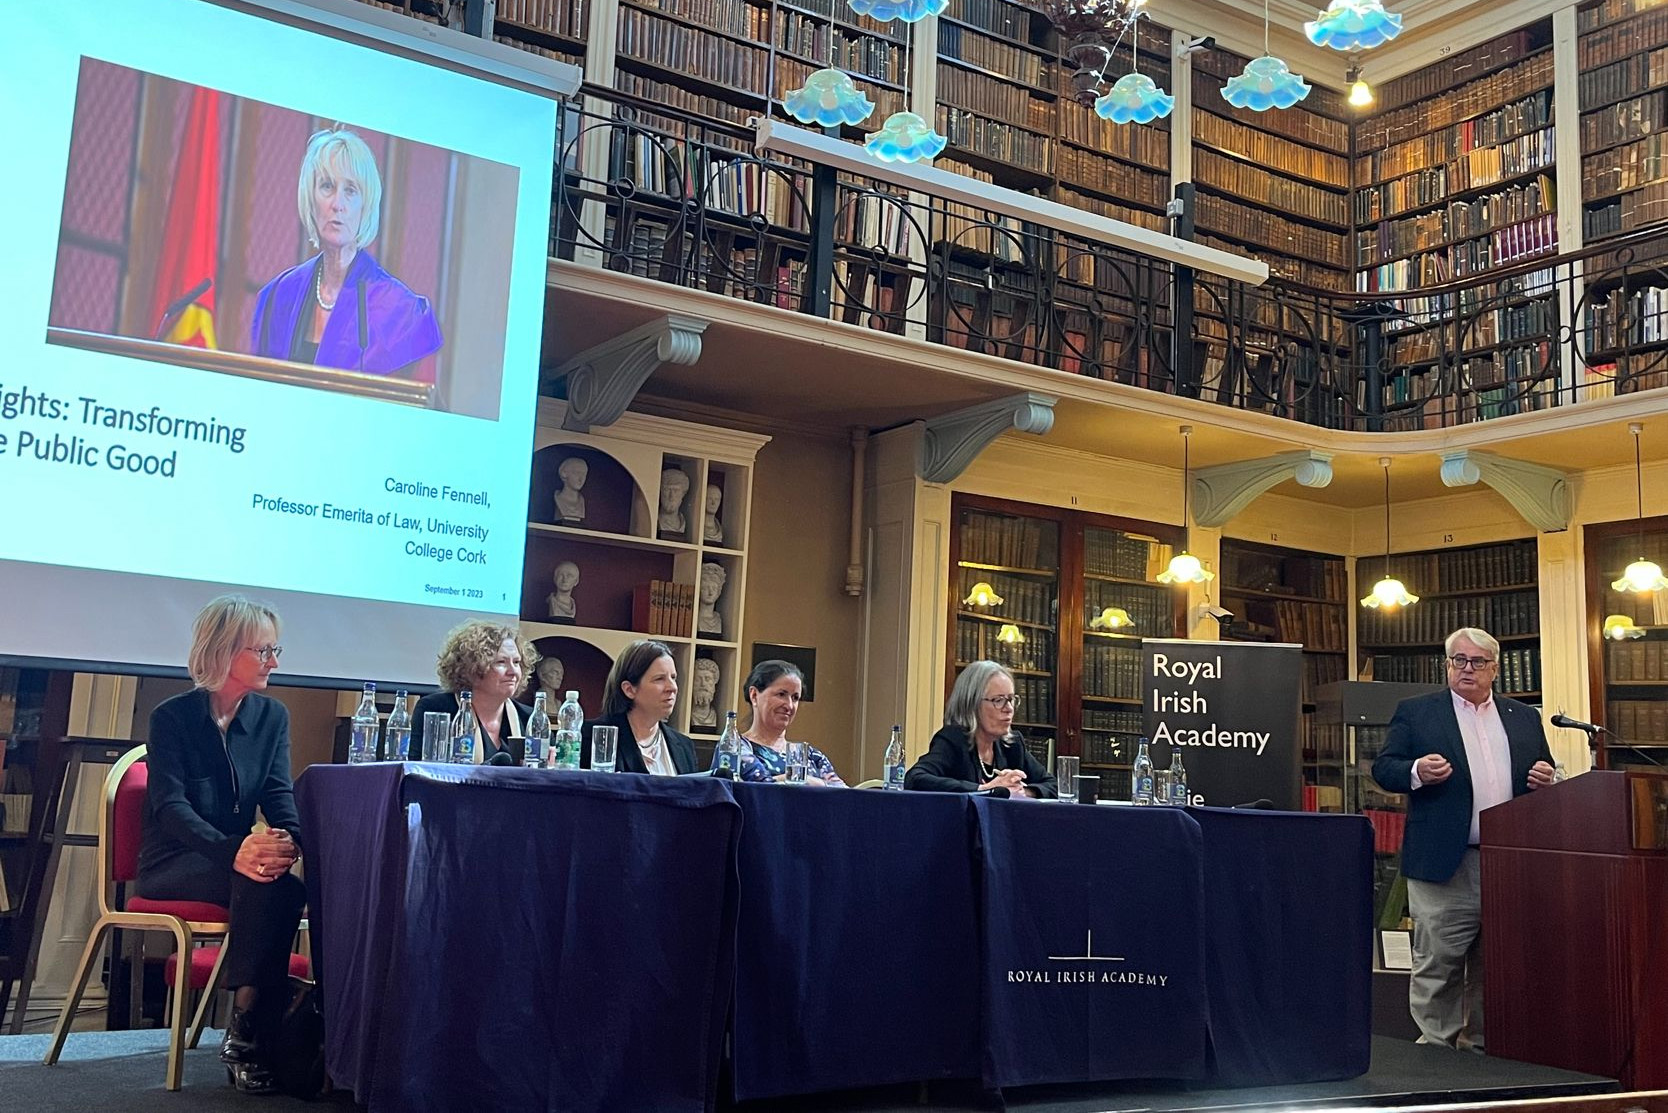 #InPictures: Professor Catherine Fennell celebrated at Royal Irish Academy